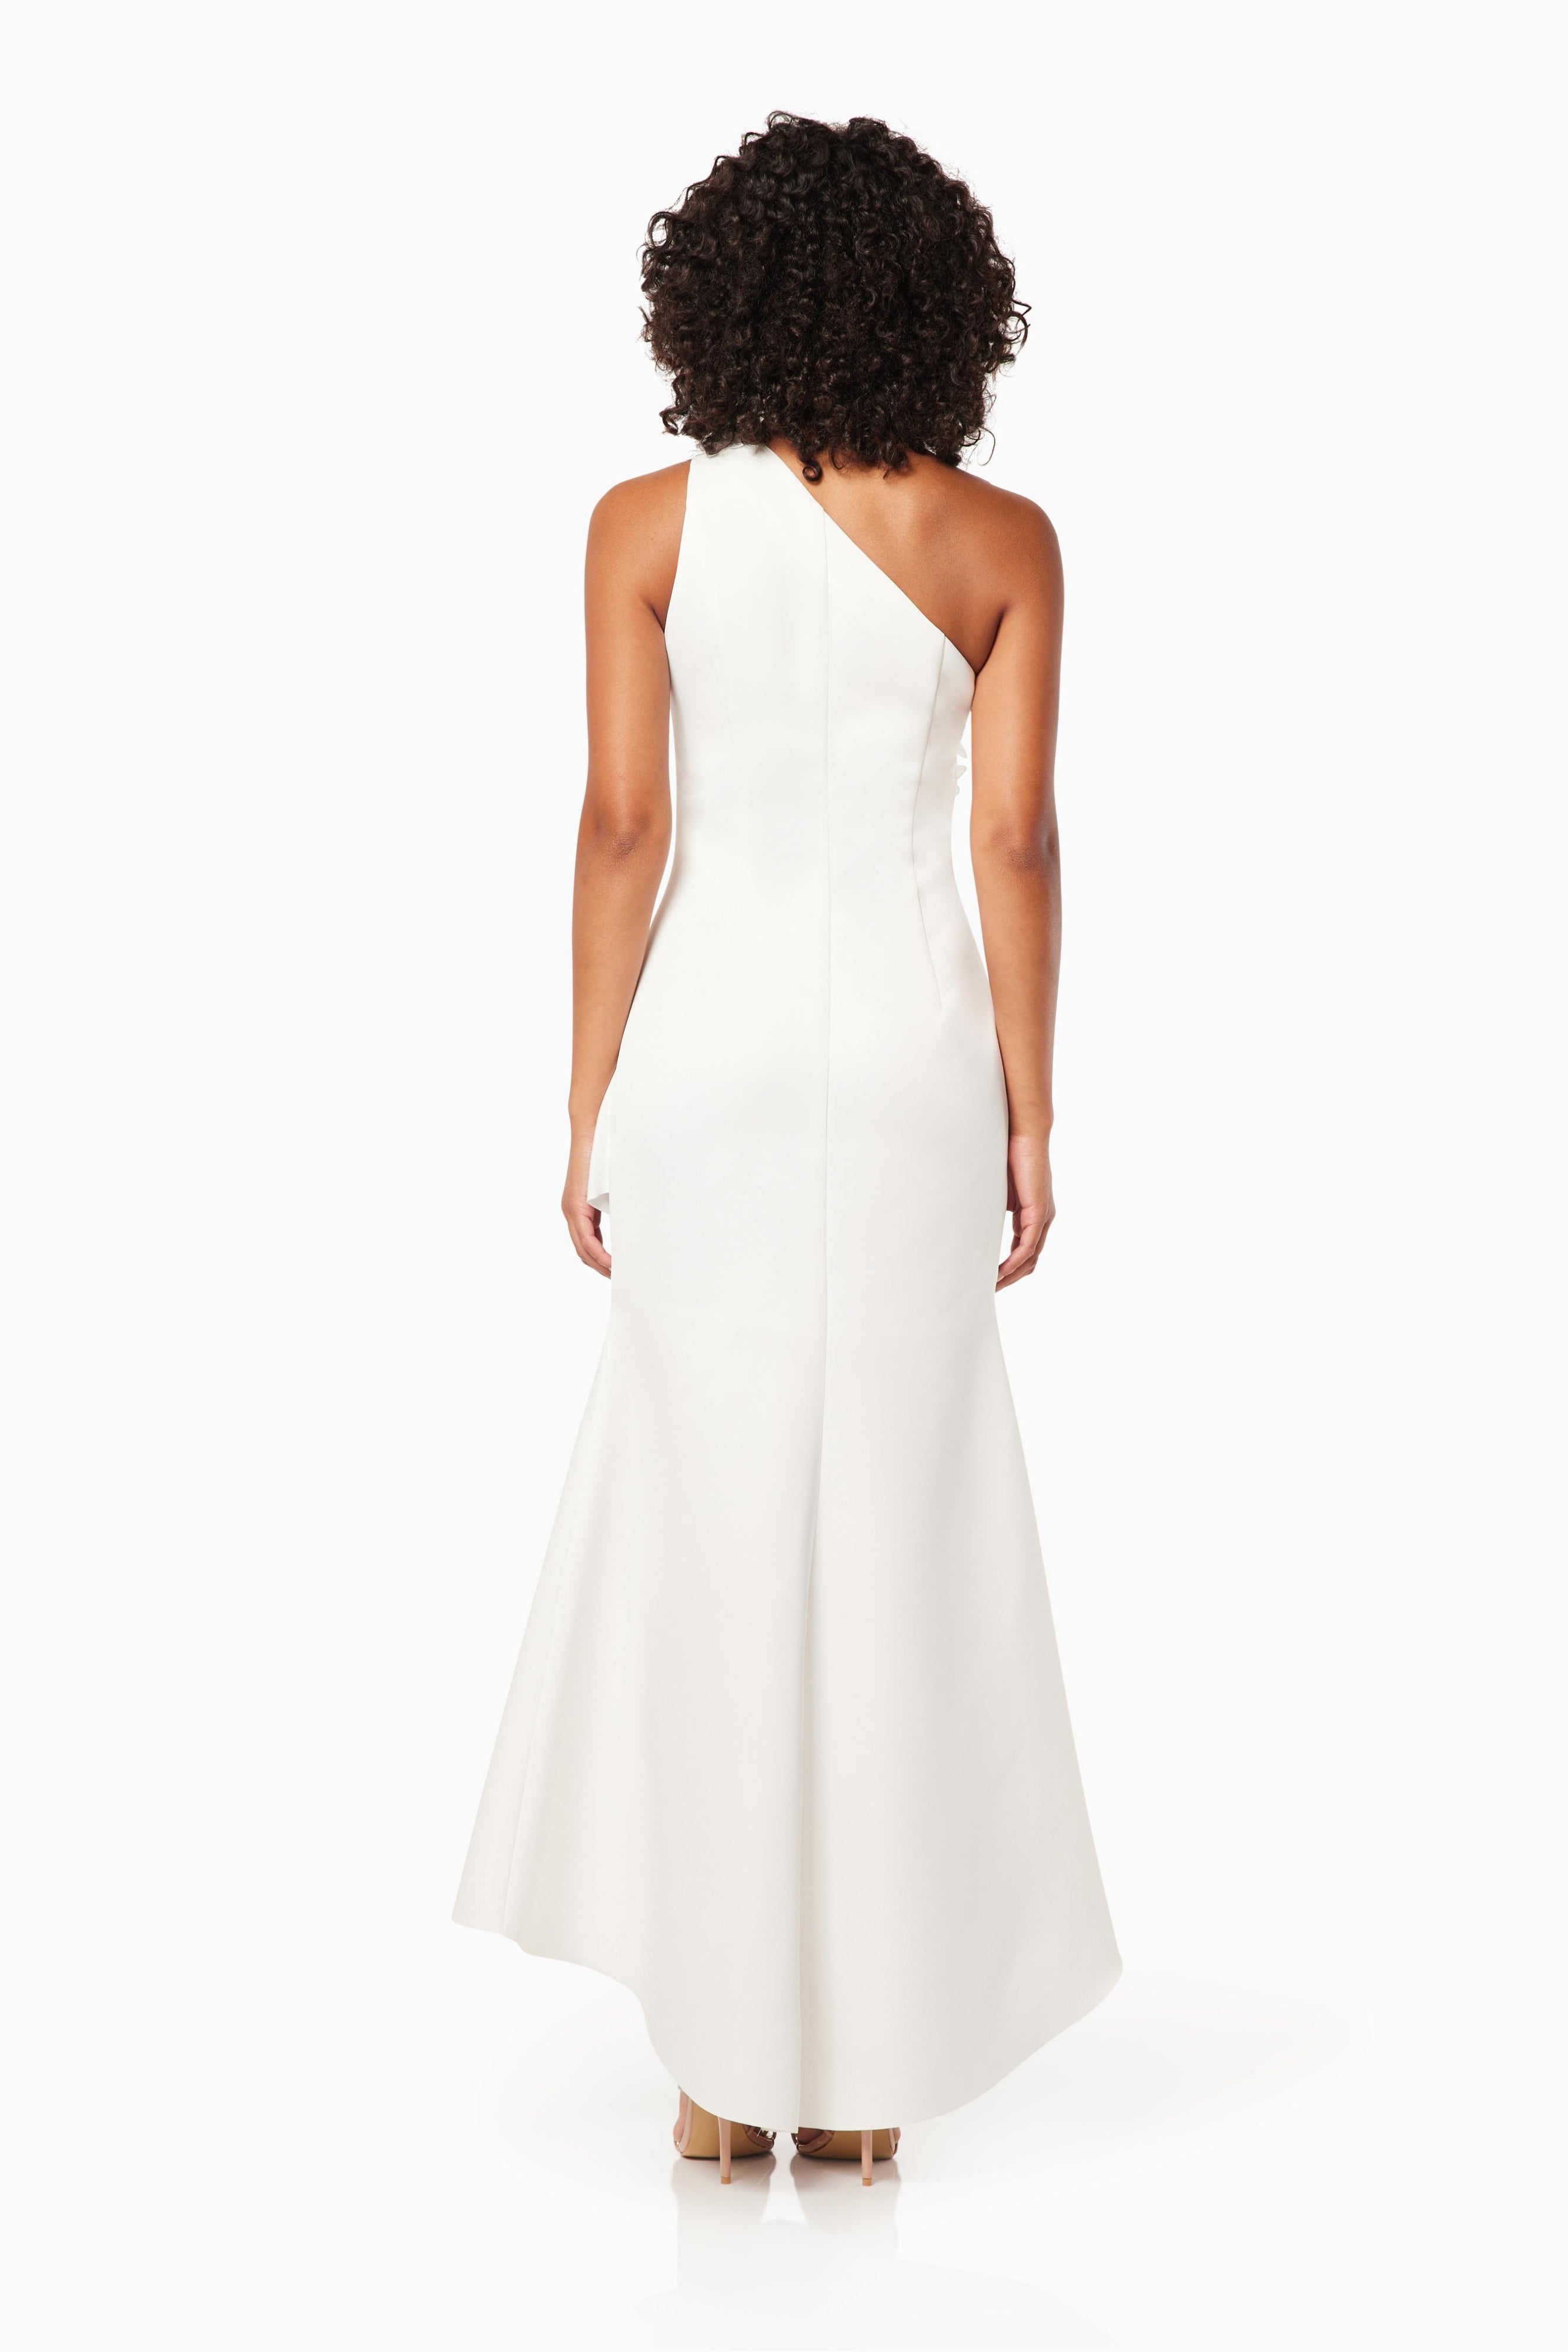 Tahlia Gown in Ivory